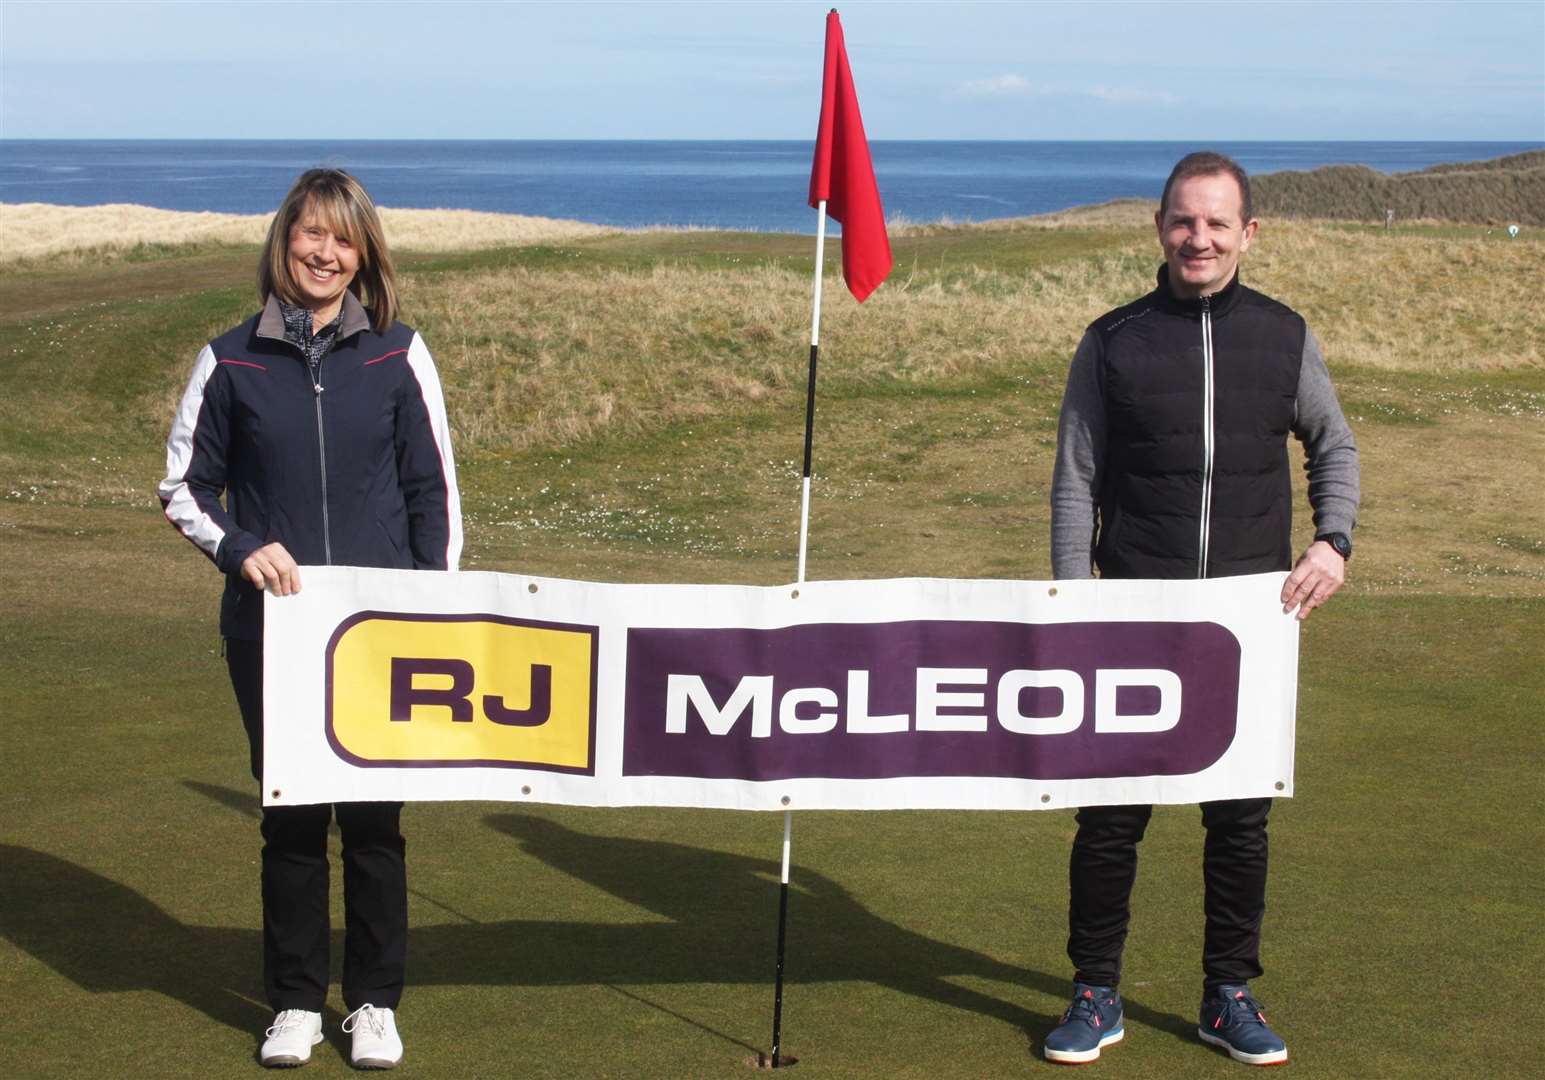 Pam Bain (left), one of the winners in the recent RJ McLeod Open Scramble hosted by Reay Golf Club, pictured with club captain Andy Bain. Pam's team-mates were Graeme Henderson (Thurso) and James Howden (Wick).